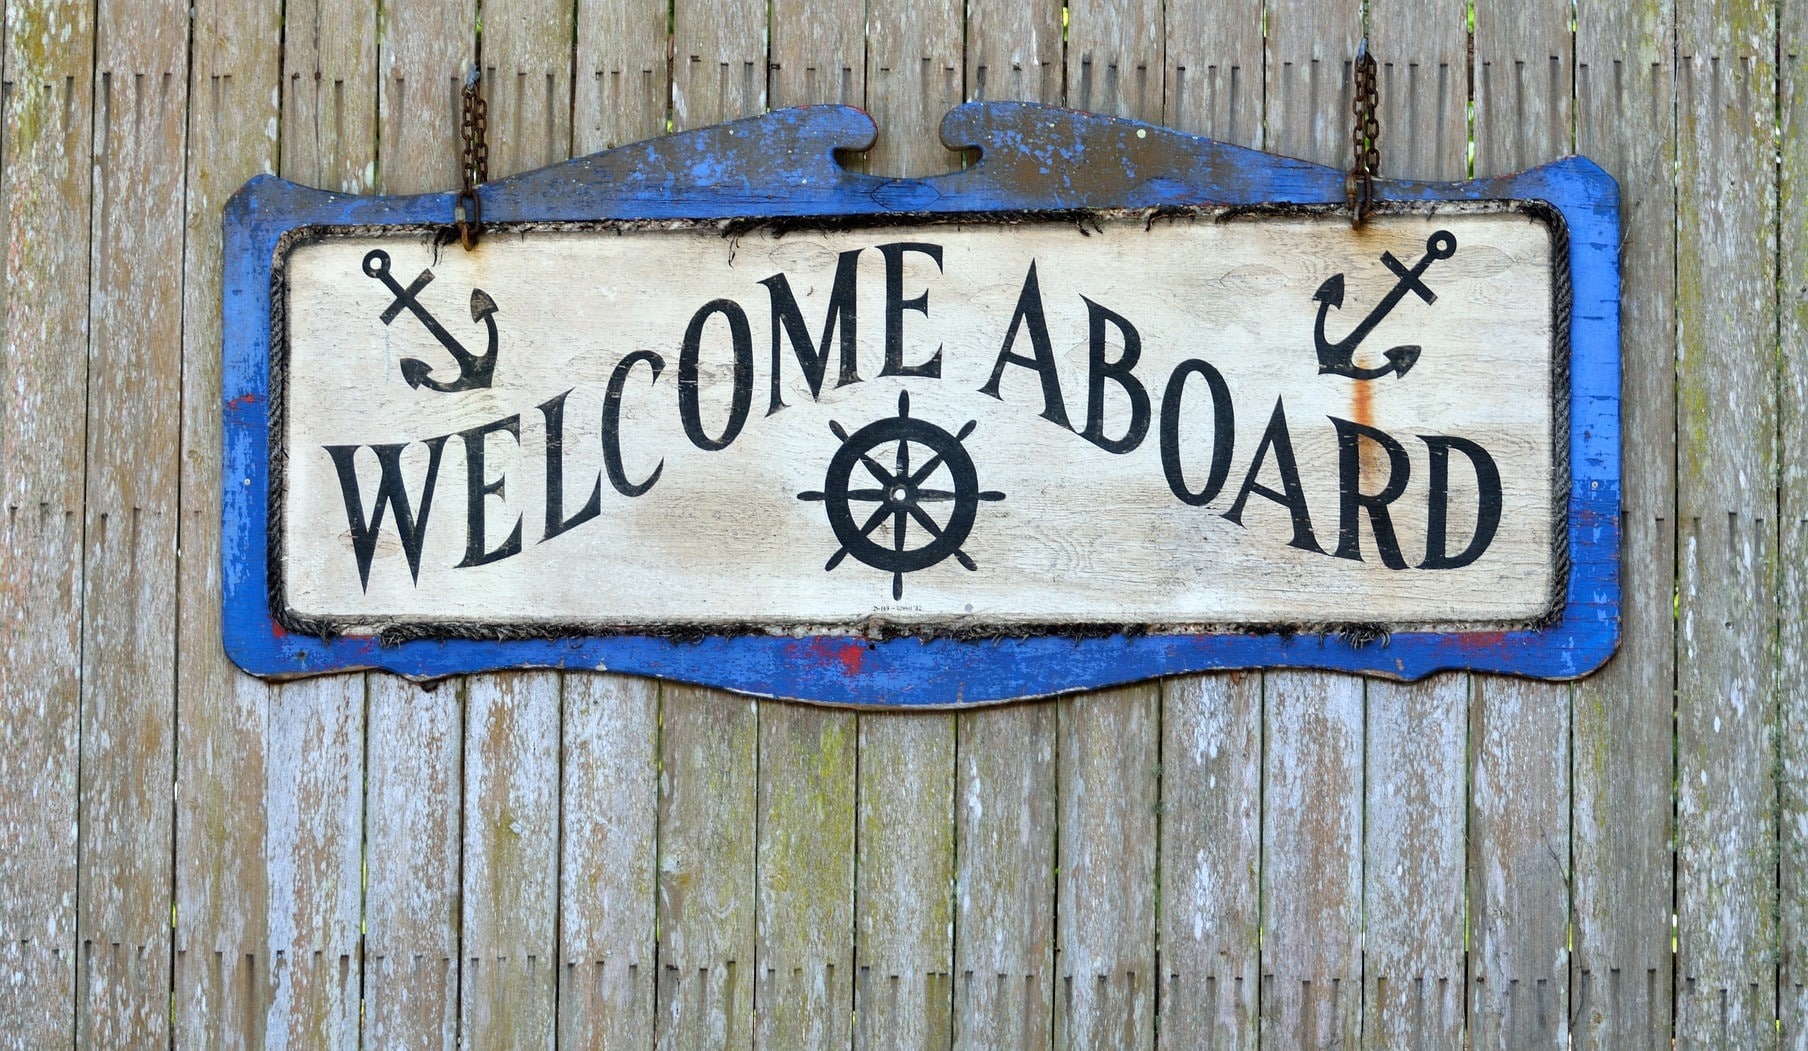 A welcome aboard sign